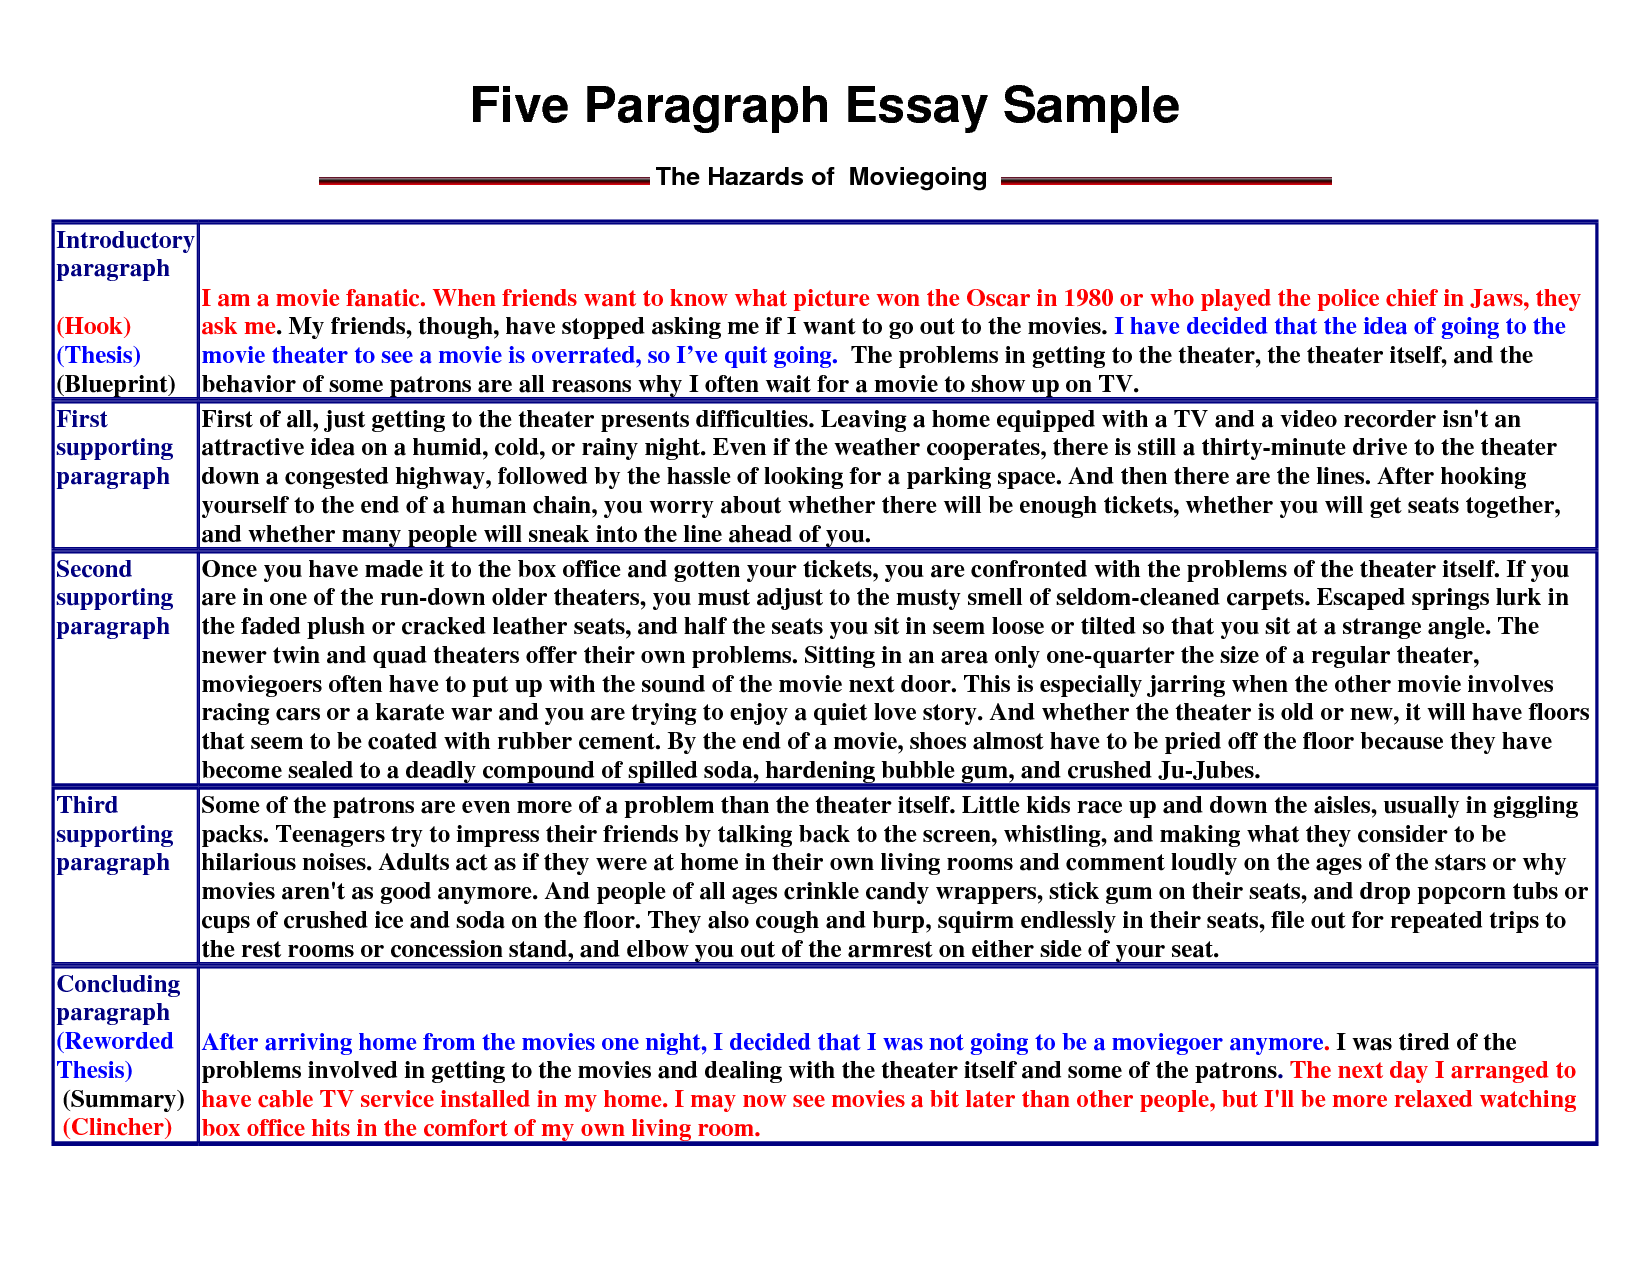 starting a body paragraph in an essay